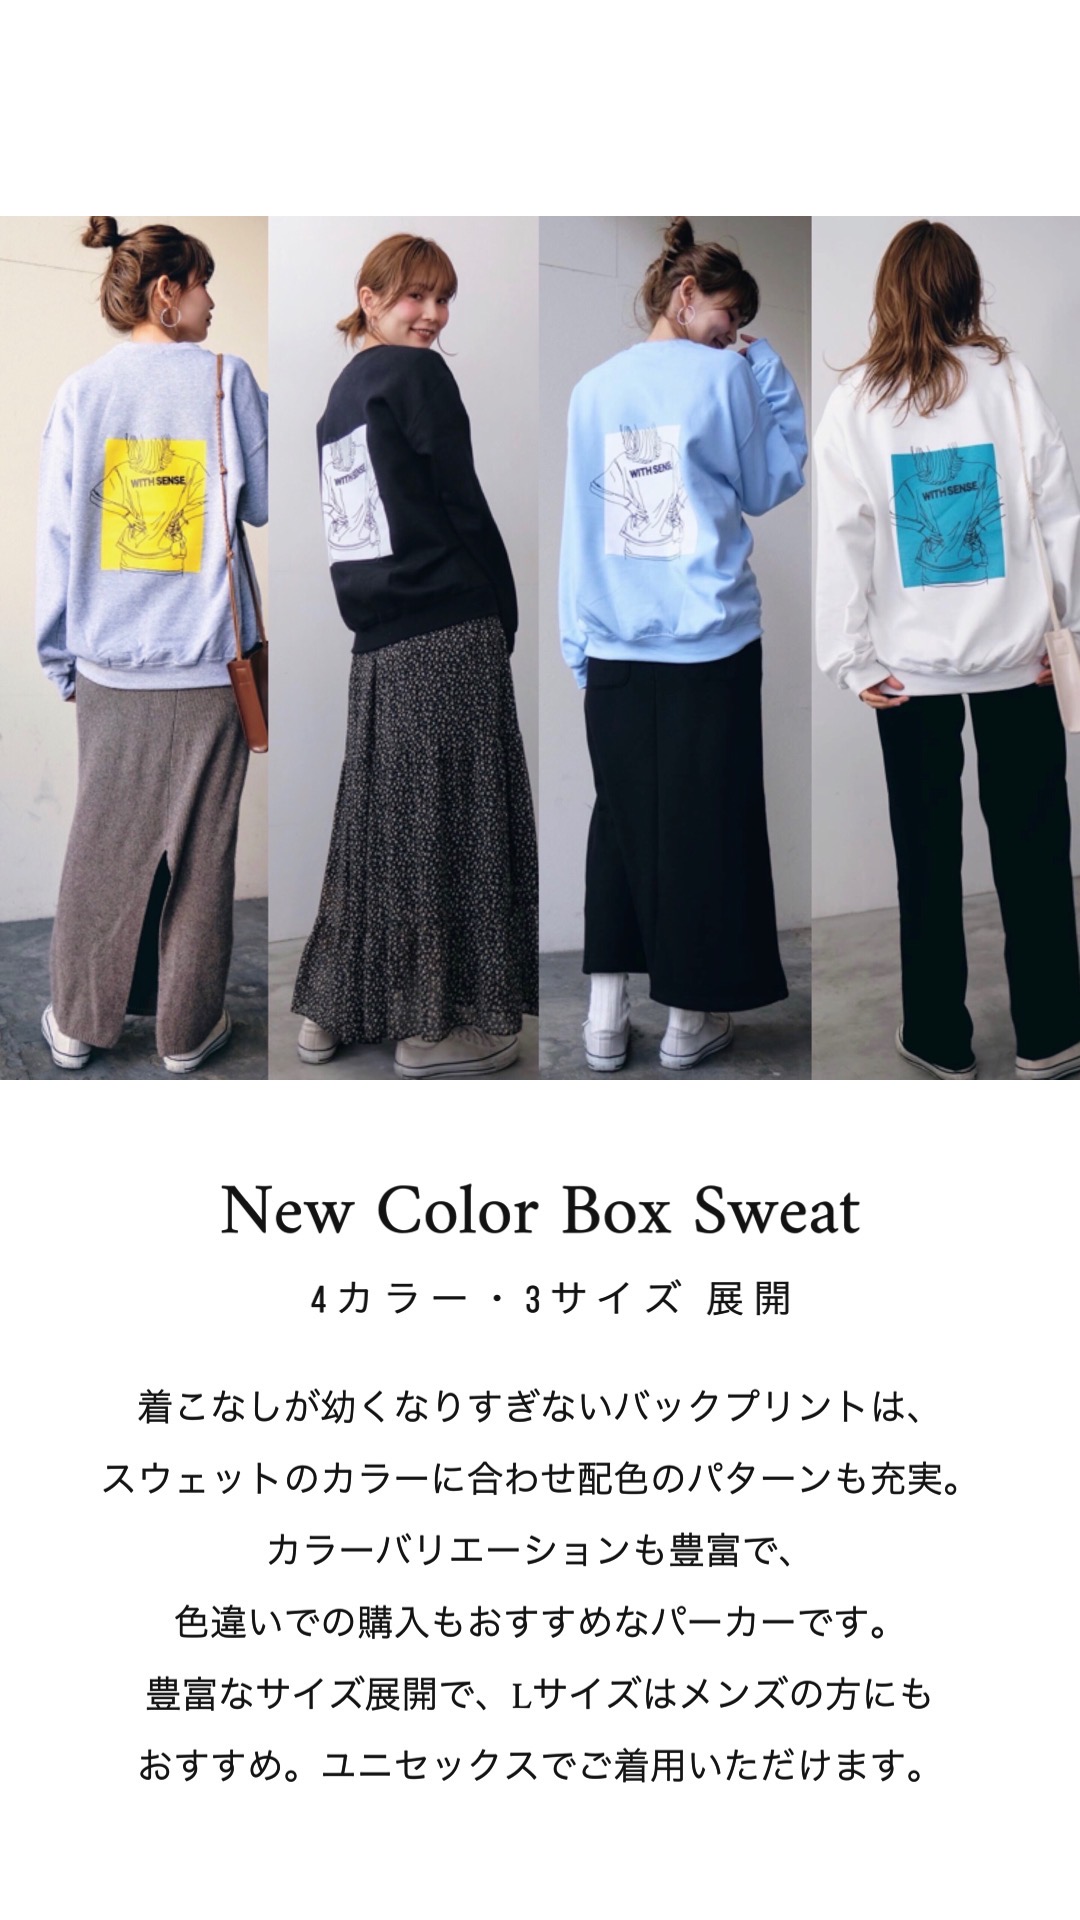 newcolorboxhoodie